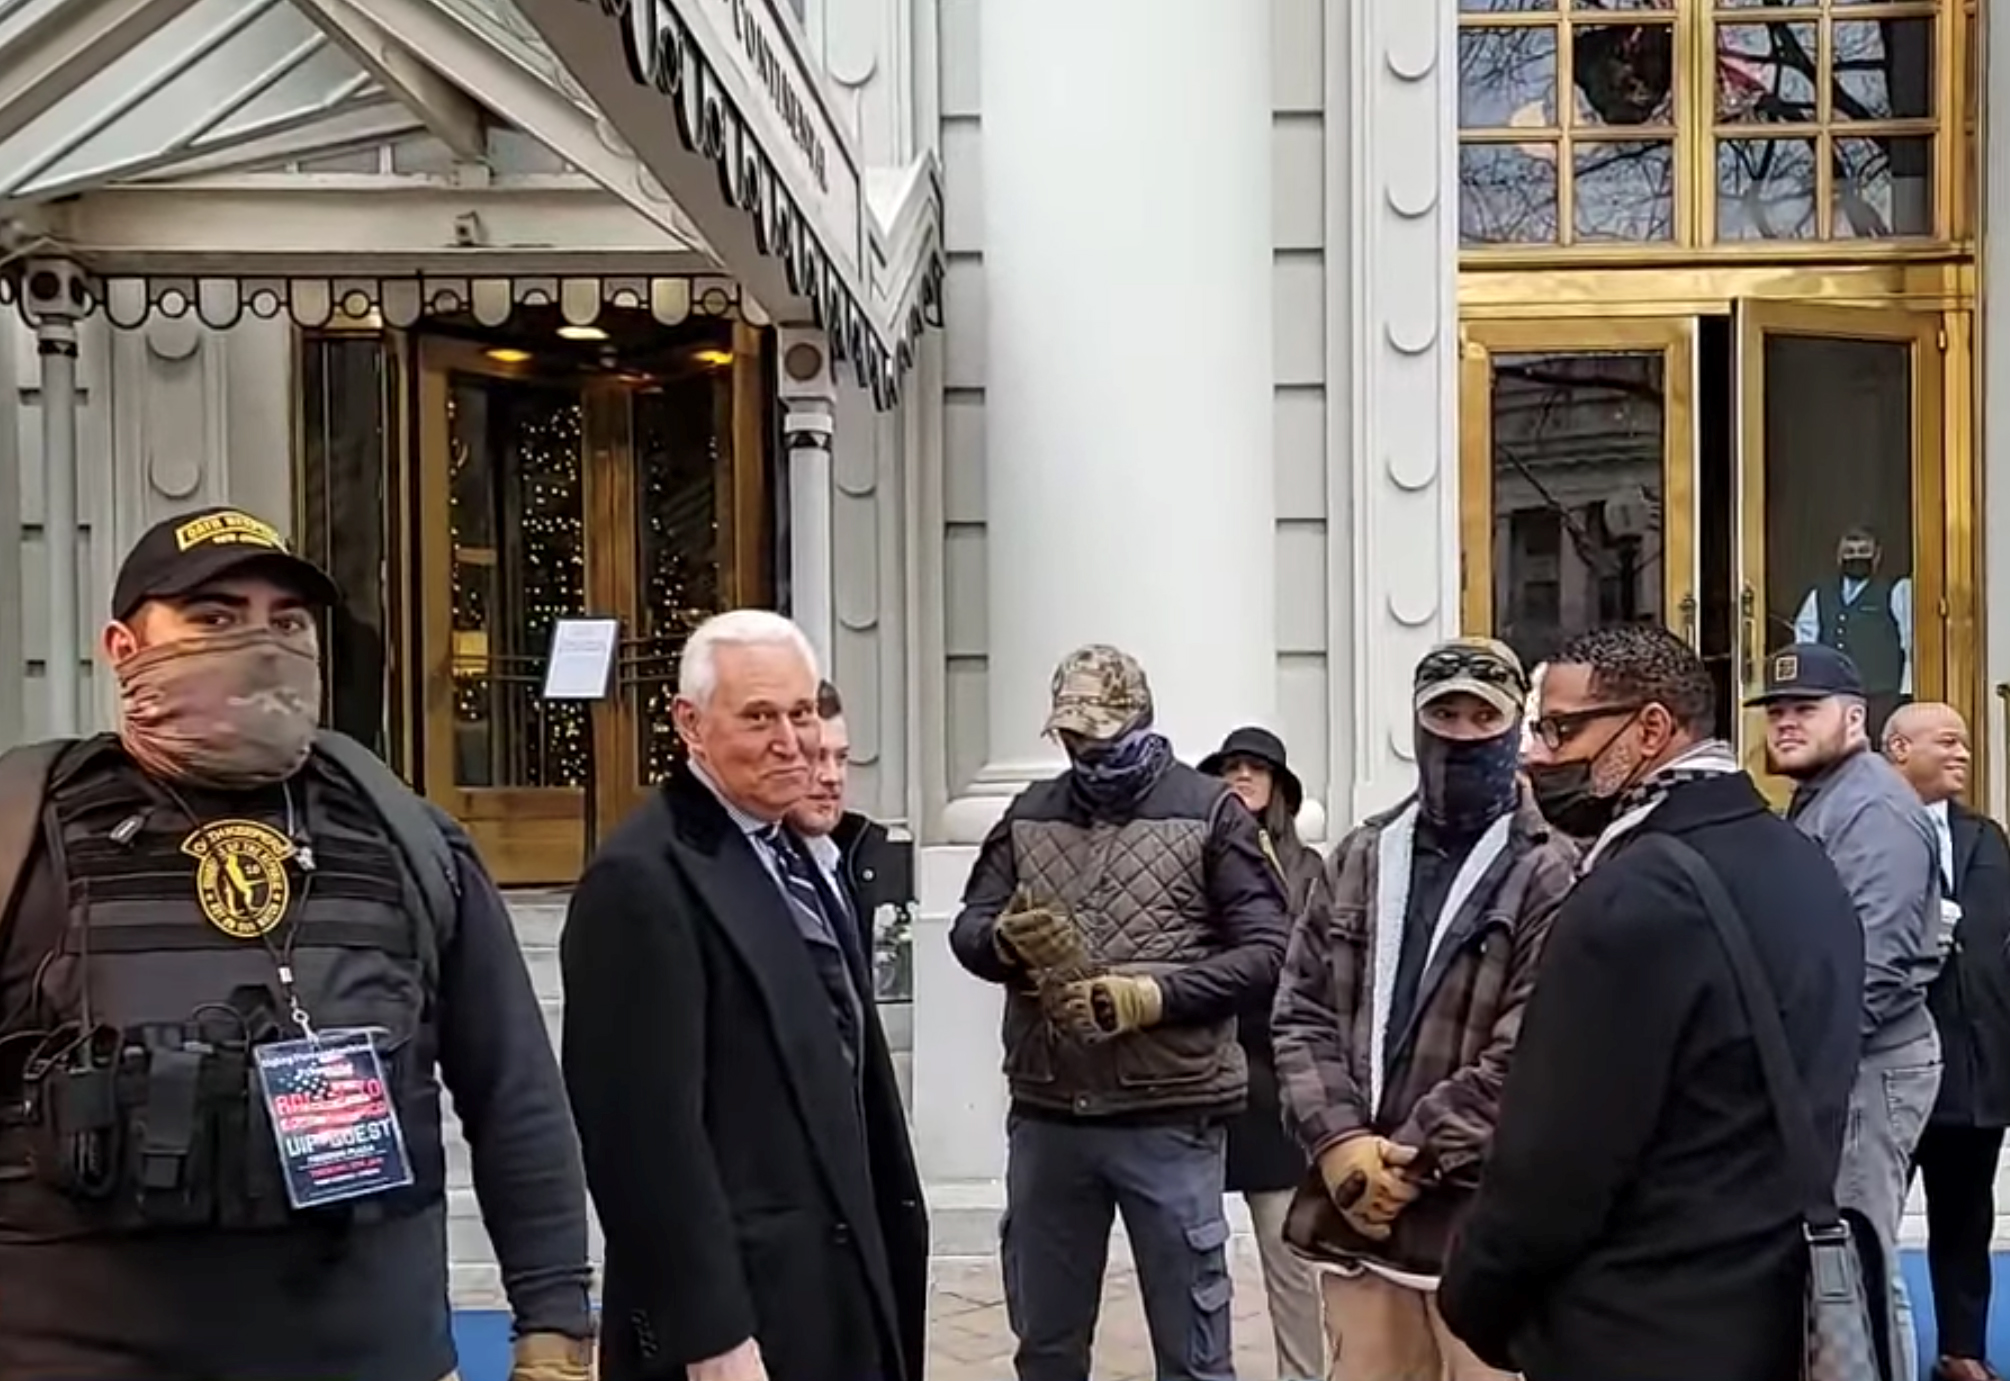 PHOTO: In a video frame grab, longtime Donald Trump adviser Roger Stone is seen outside a Washington, D.C., hotel with members of the Oath Keepers on the morning of Jan. 6, 2021.